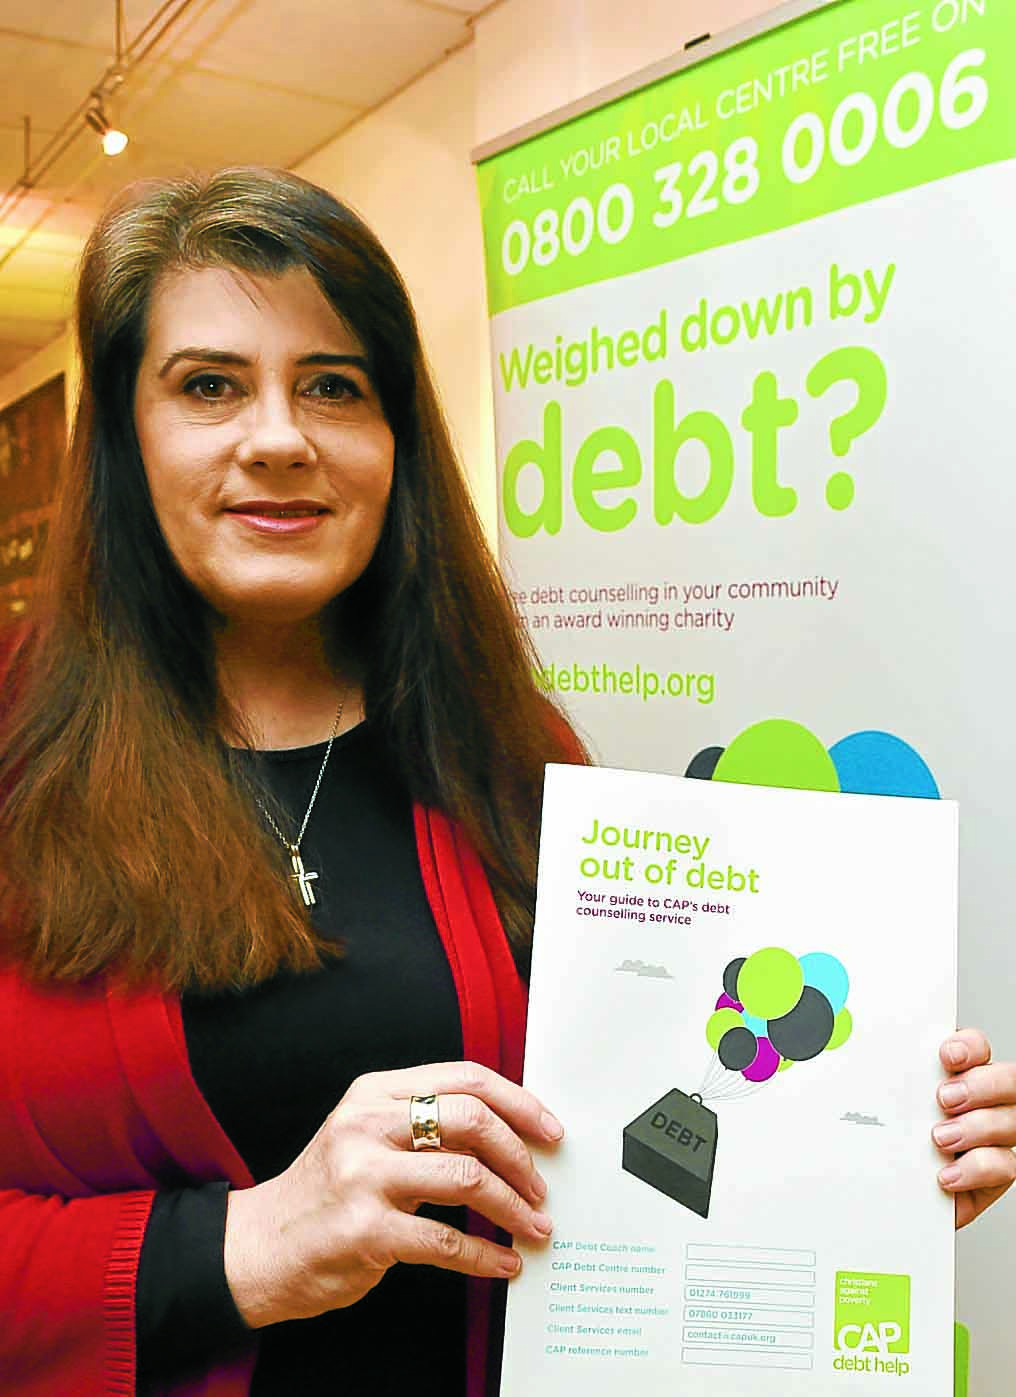 Tracy is a helping hand for those in debt